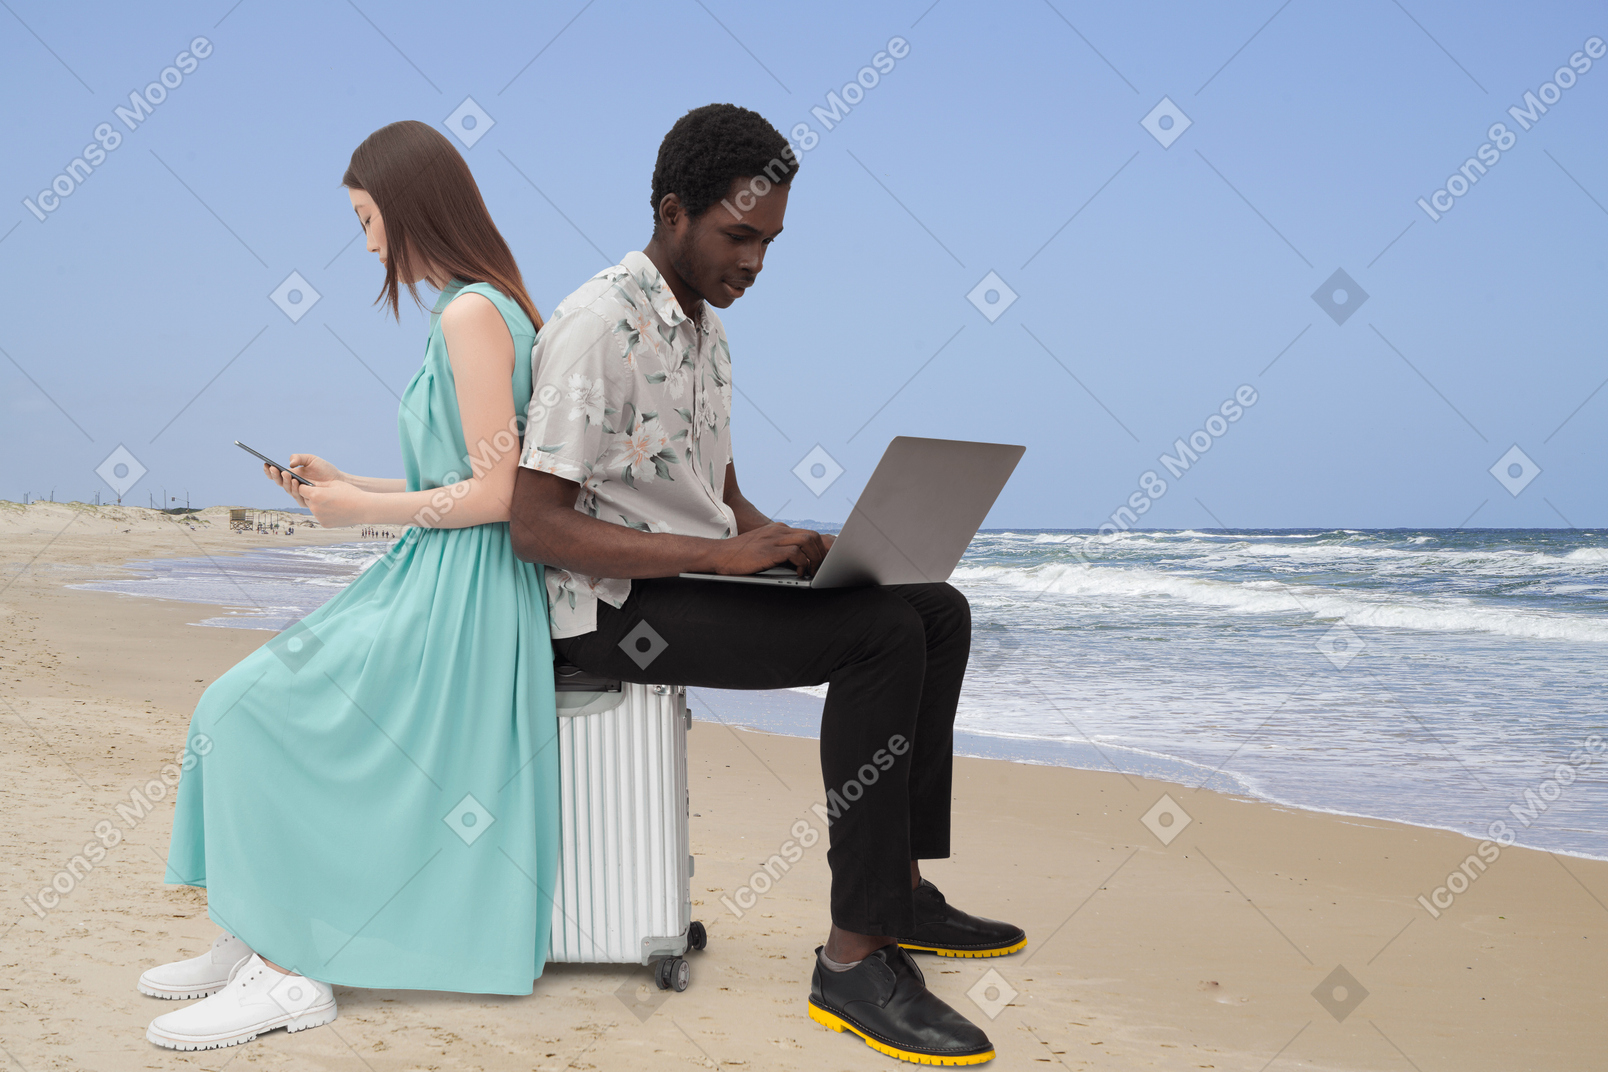 A man and a woman sitting on a suitcase on the beach